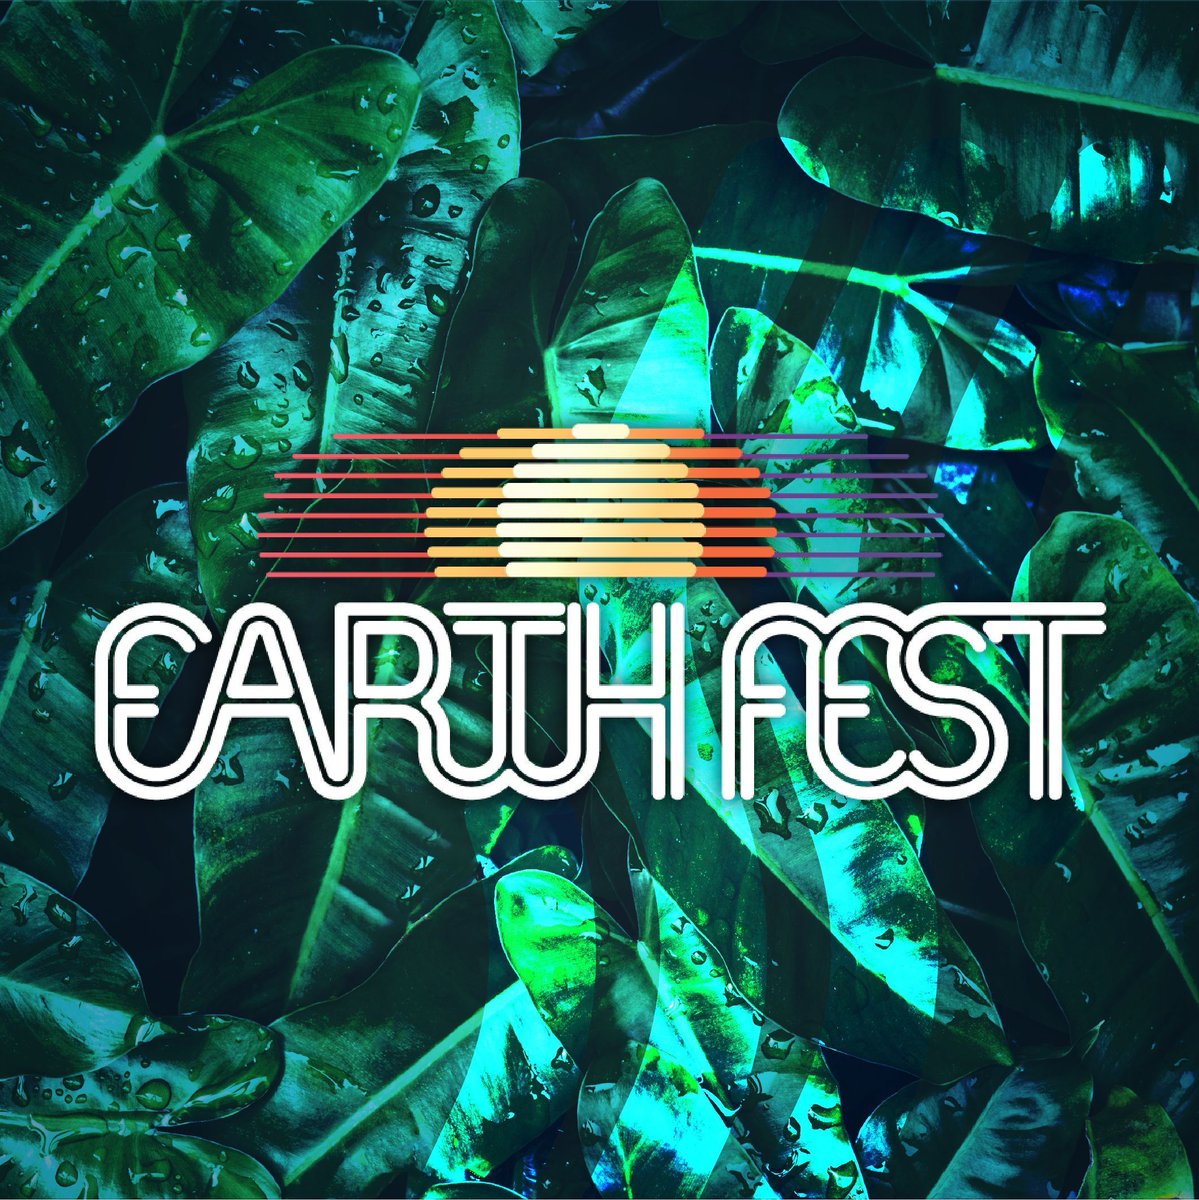 INSPIRE. EDUCATE. MOTIVATE. We're proud to support the inaugural UW–Madison Earth Fest! Hosted by @nelsoninstitute and @sustainuw, Earth Fest unites our campus over the one resource and interest we all share: our world. Learn more at earthfest.wisc.edu.